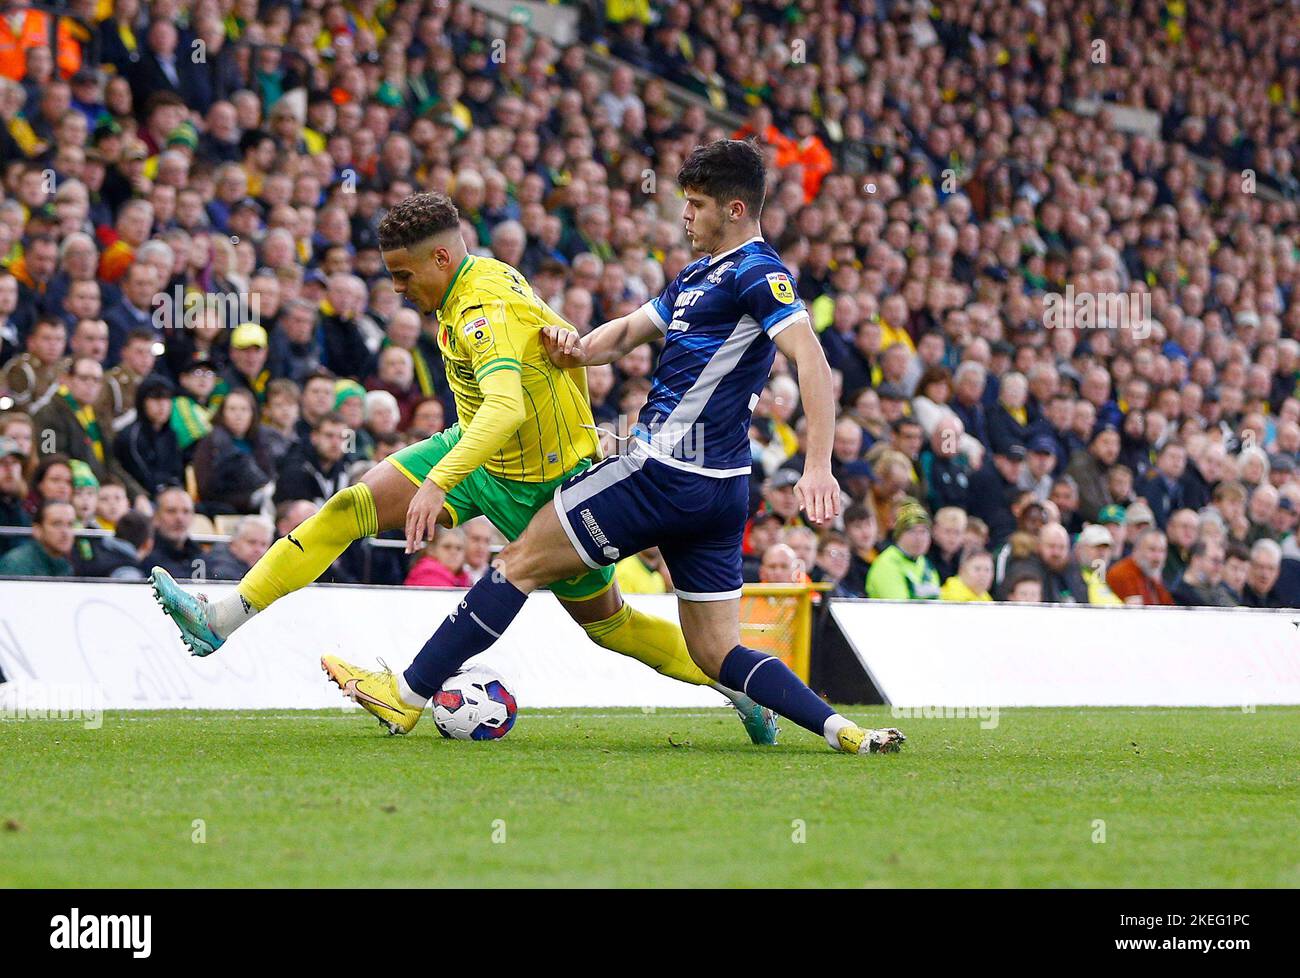 Norwich, UK. 12th Nov, 2022. Max Aarons of Norwich City comes under pressure from Ryan Giles of Middlesbrough during the Sky Bet Championship match between Norwich City and Middlesbrough at Carrow Road on November 12th 2022 in Norwich, England. (Photo by Mick Kearns/phcimages.com) Credit: PHC Images/Alamy Live News Stock Photo